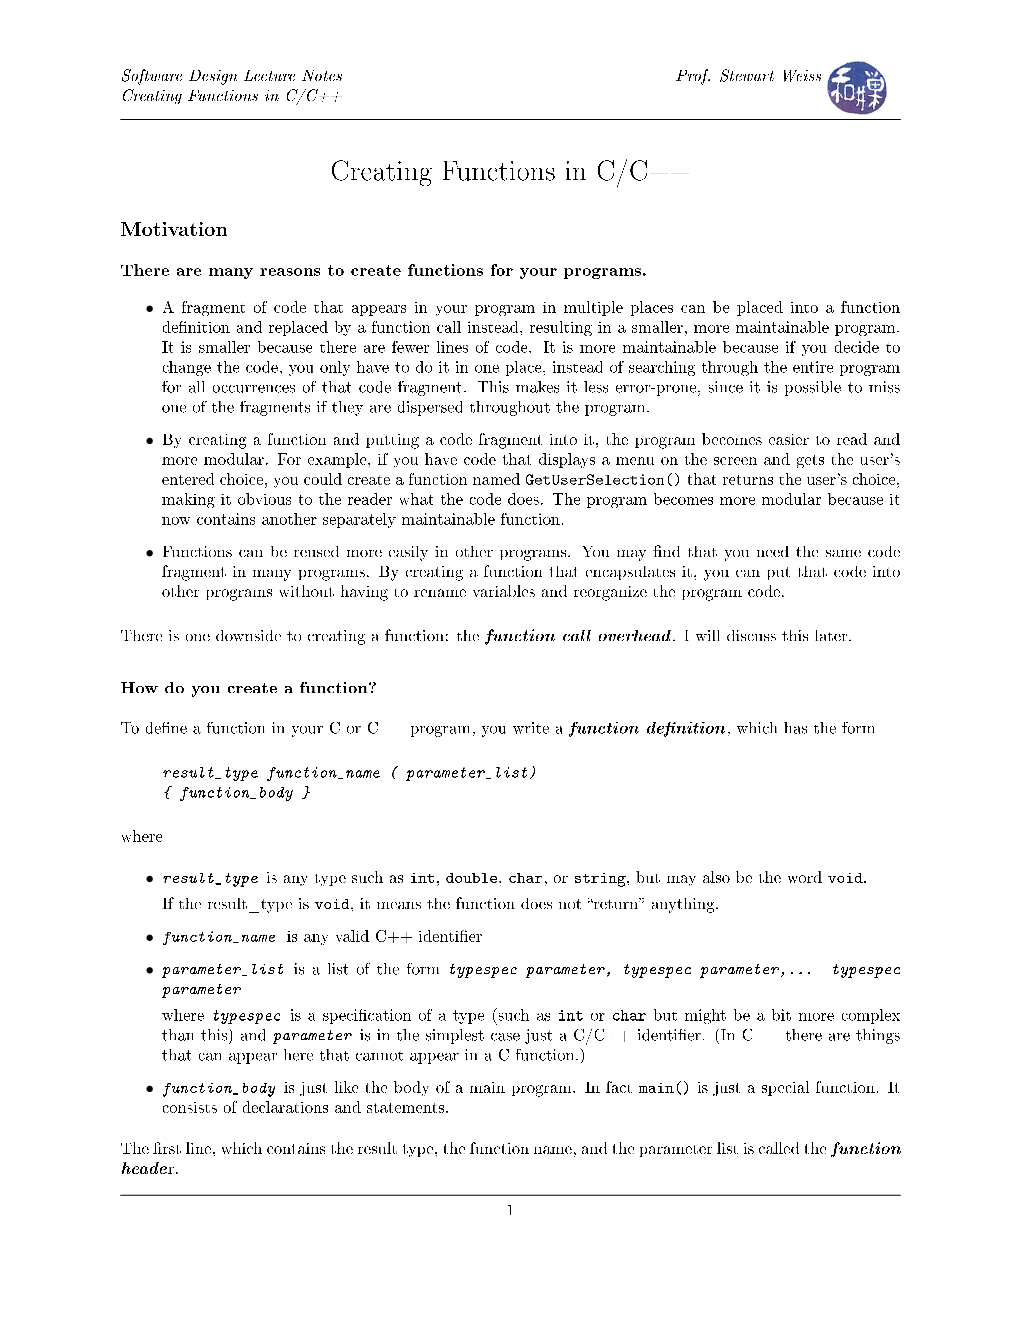 How to Create C/C++ Functions (PDF)